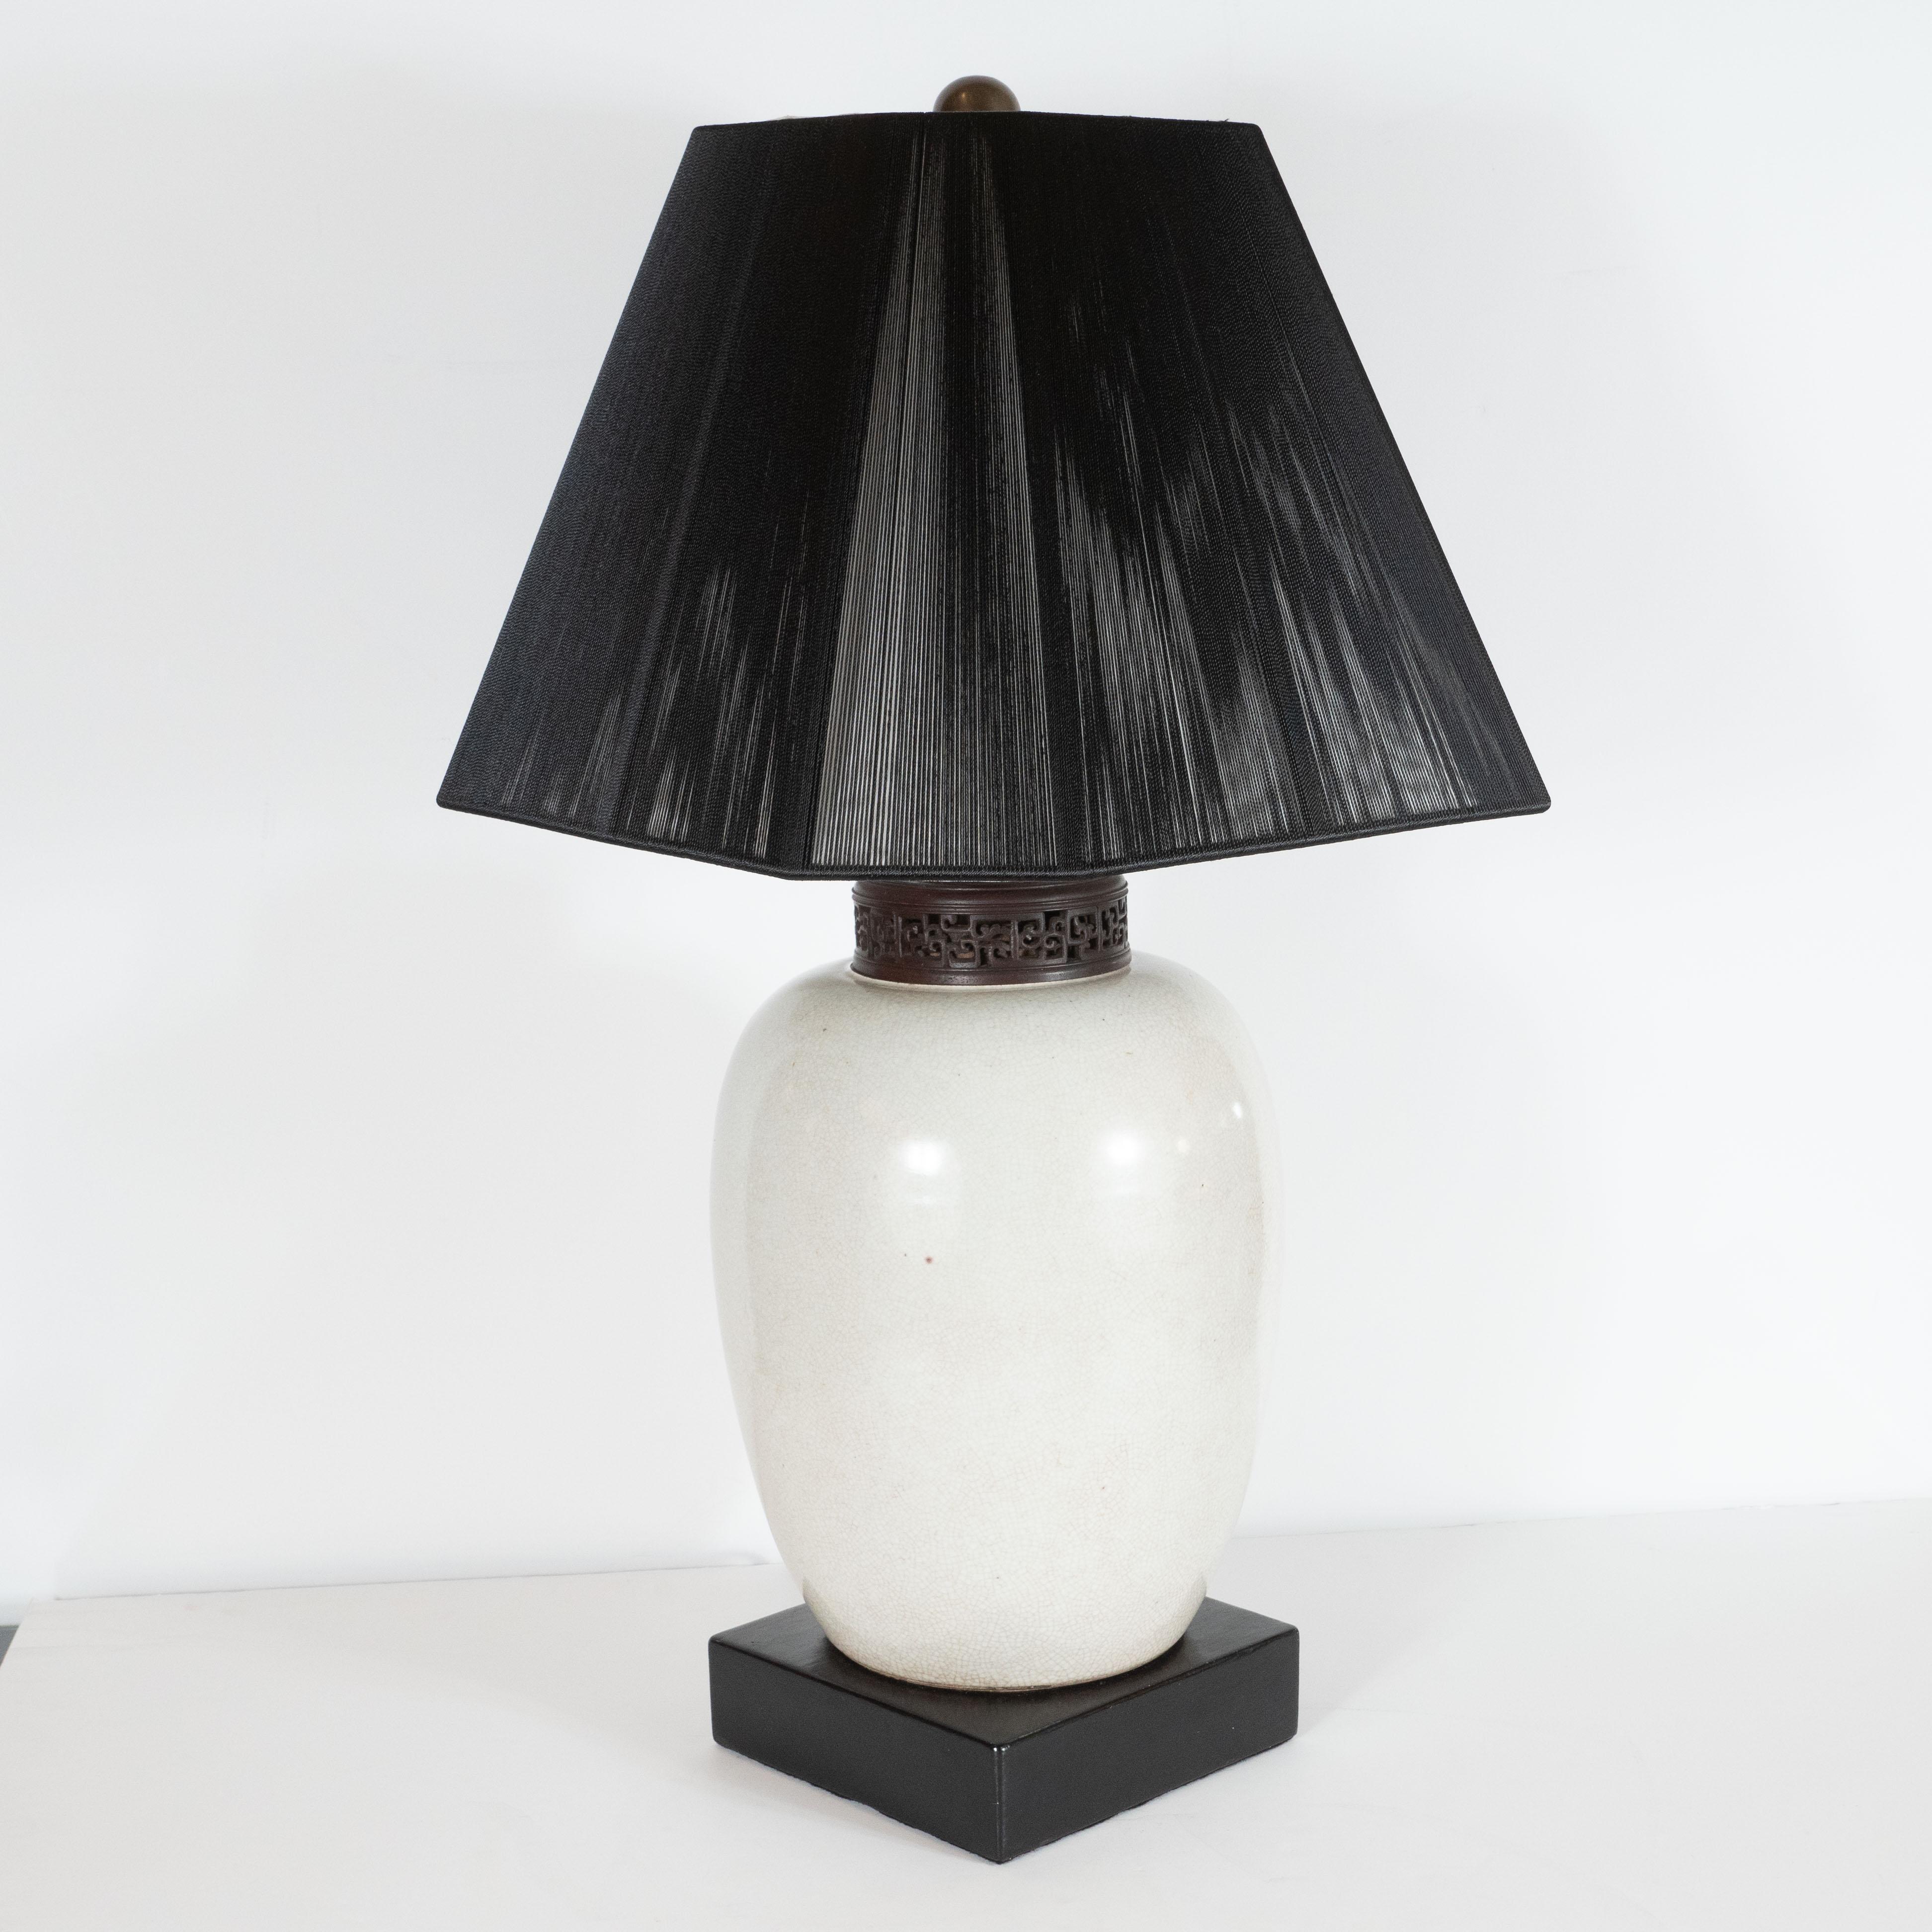 American Estate of Claudette Colbert Signed Billy Haines Lamp with Illume Custom Shade